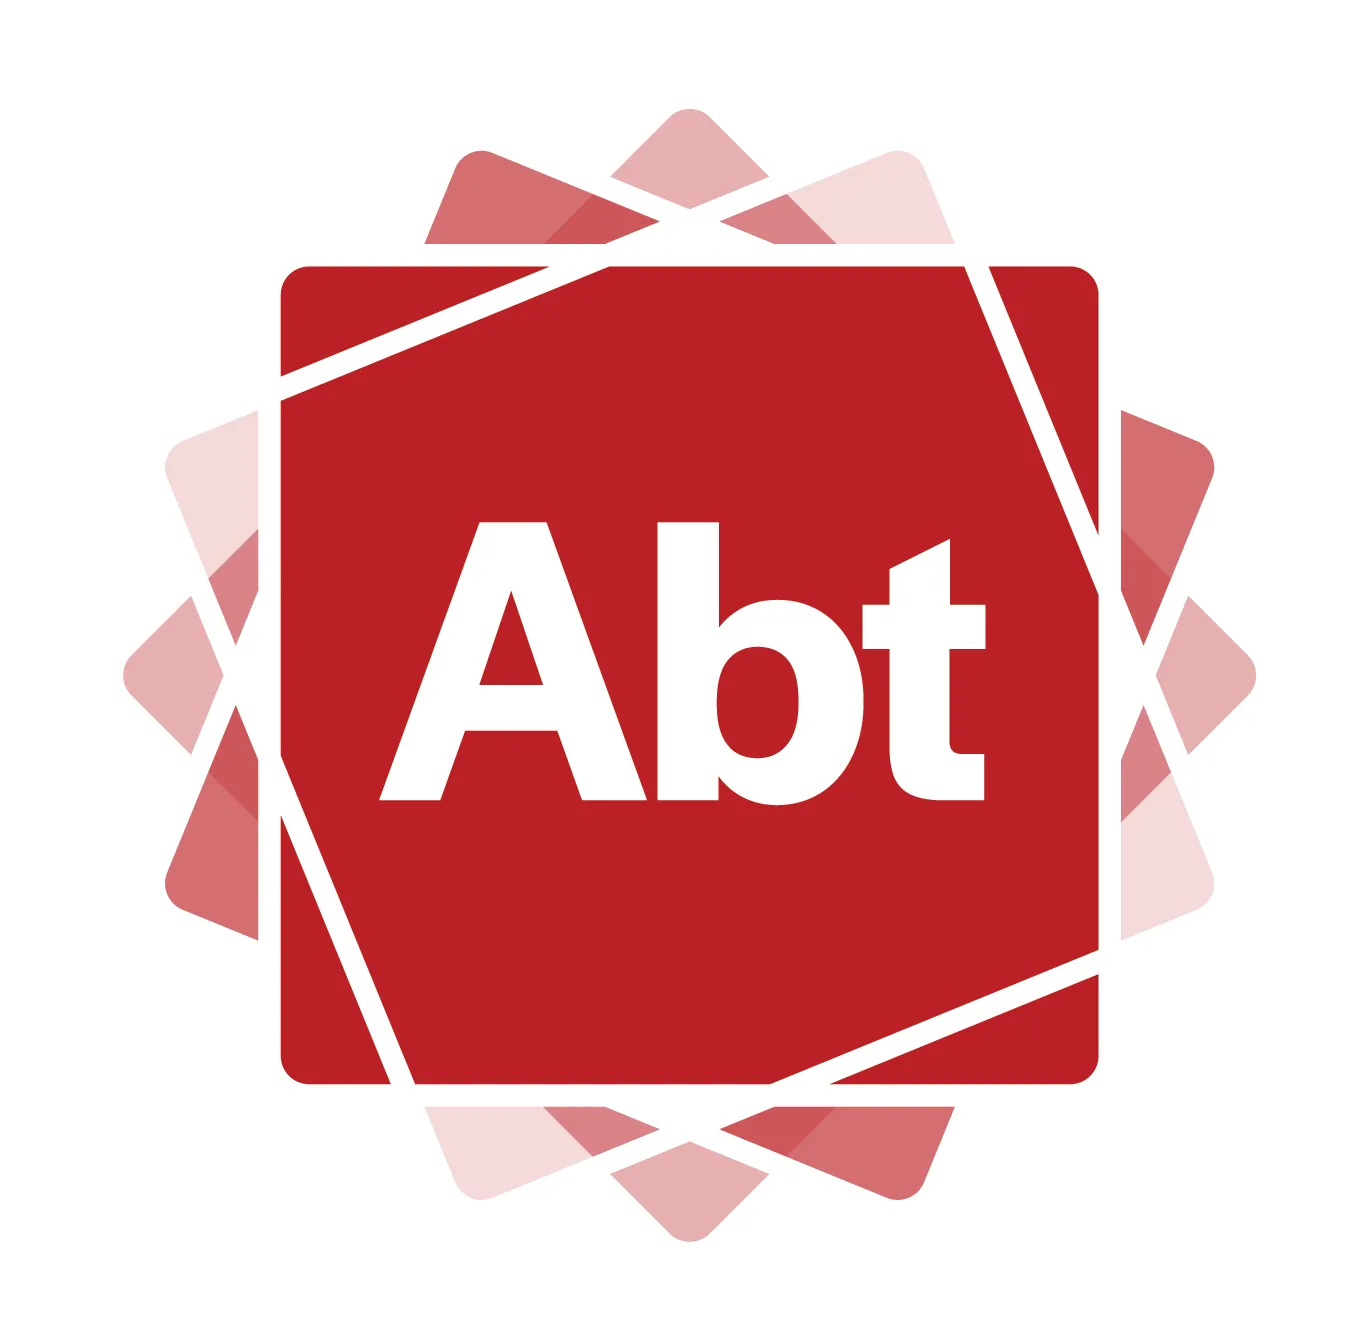 Red, geometric logo with the word 'Abt' in white